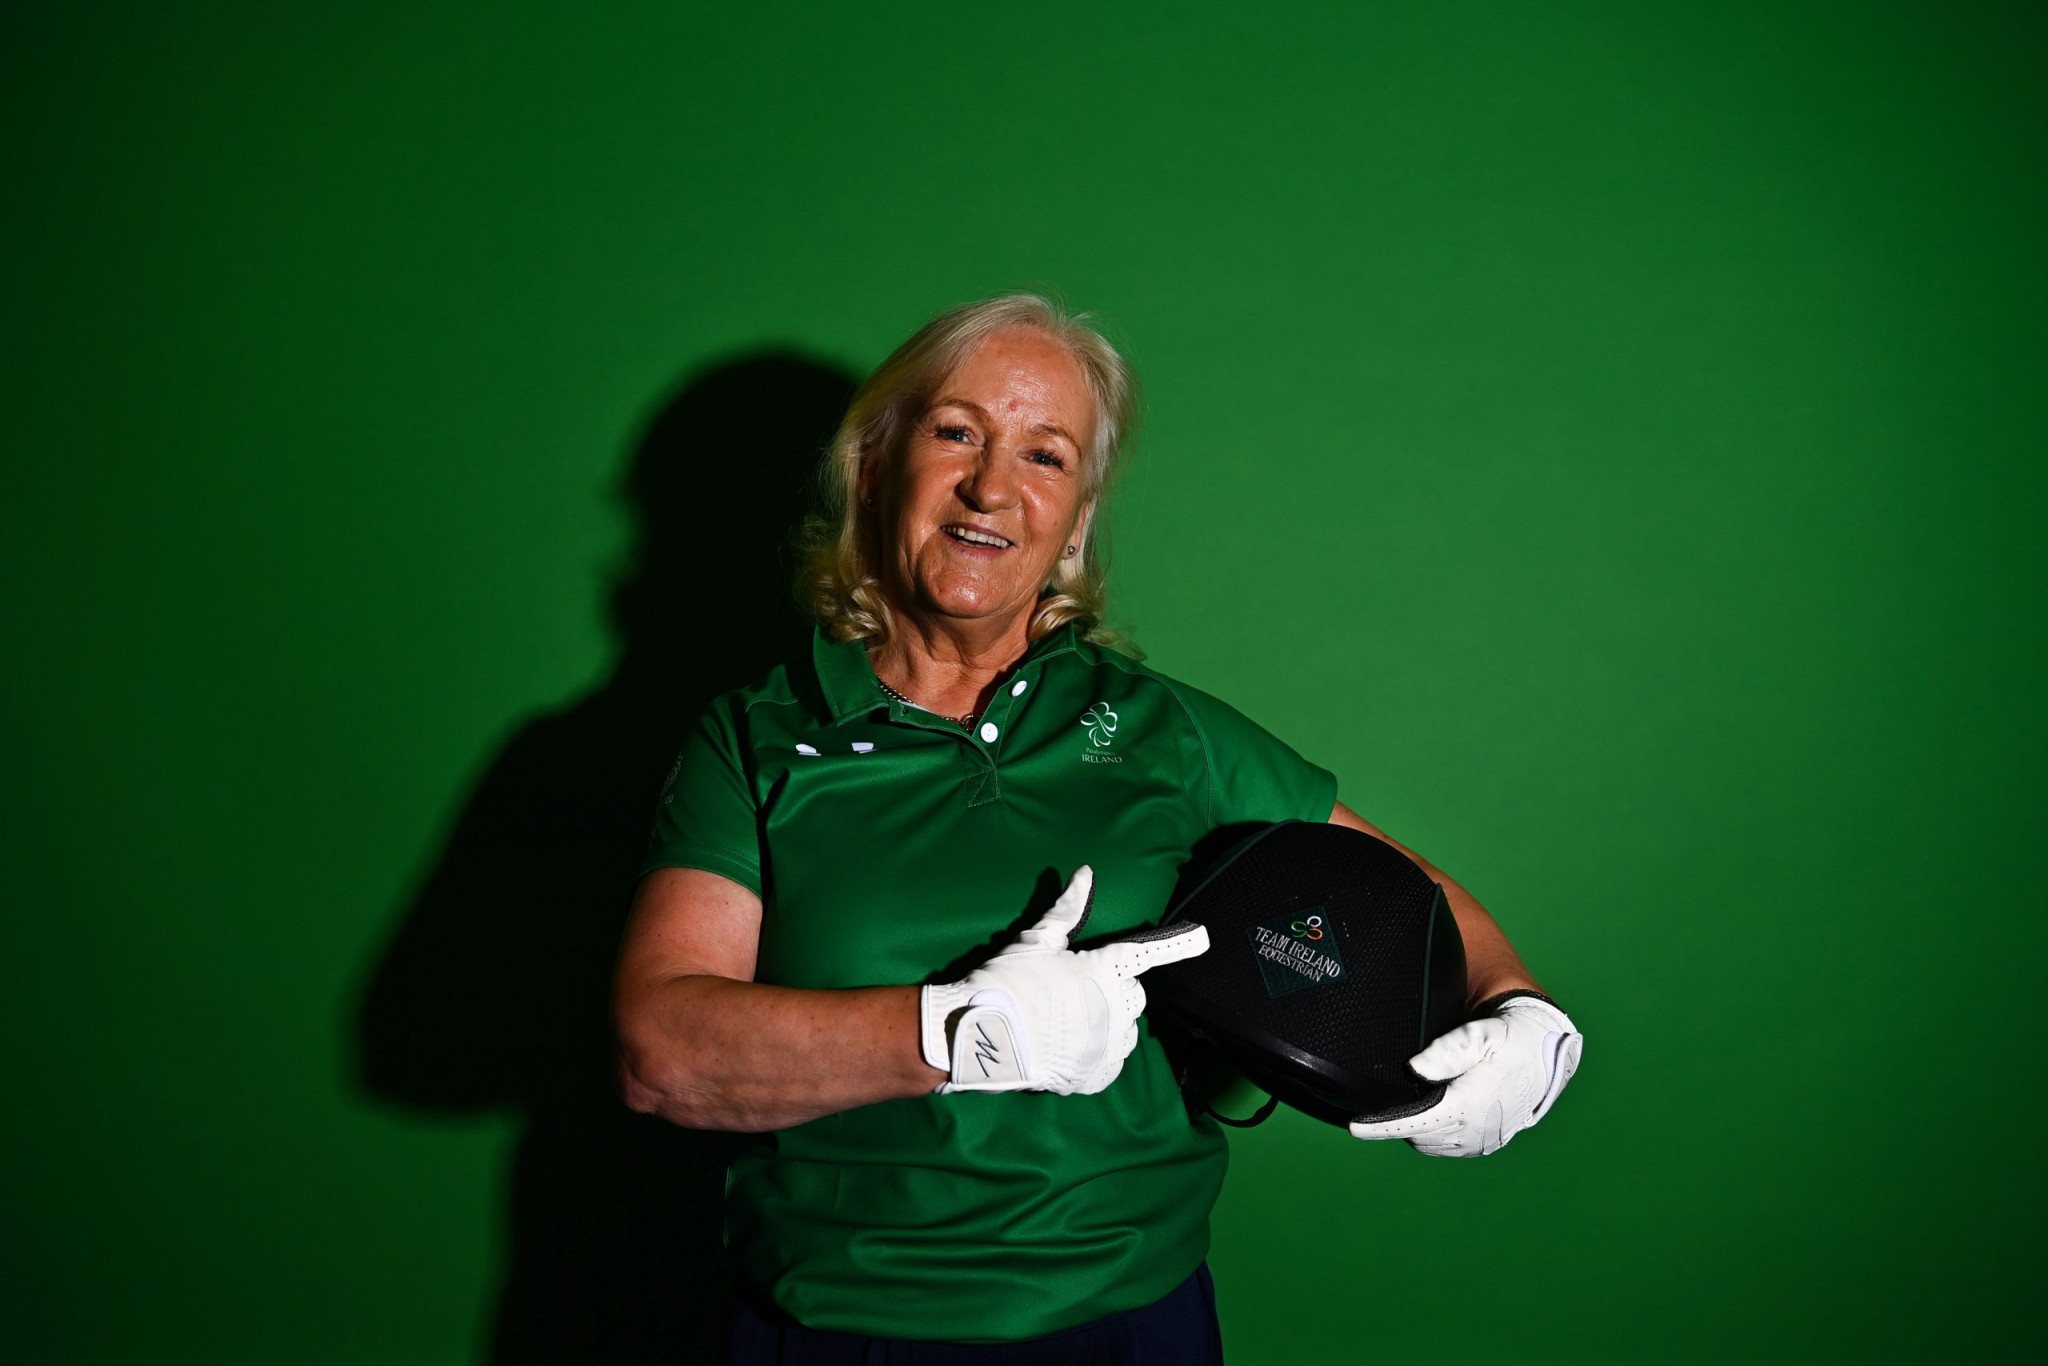 63-year-old Rosemary Gaffney fell from a horse in 2007 and suffered multiple fractures to her knee and leg but will compete in this summer's Paralympics ©Paralympics Ireland